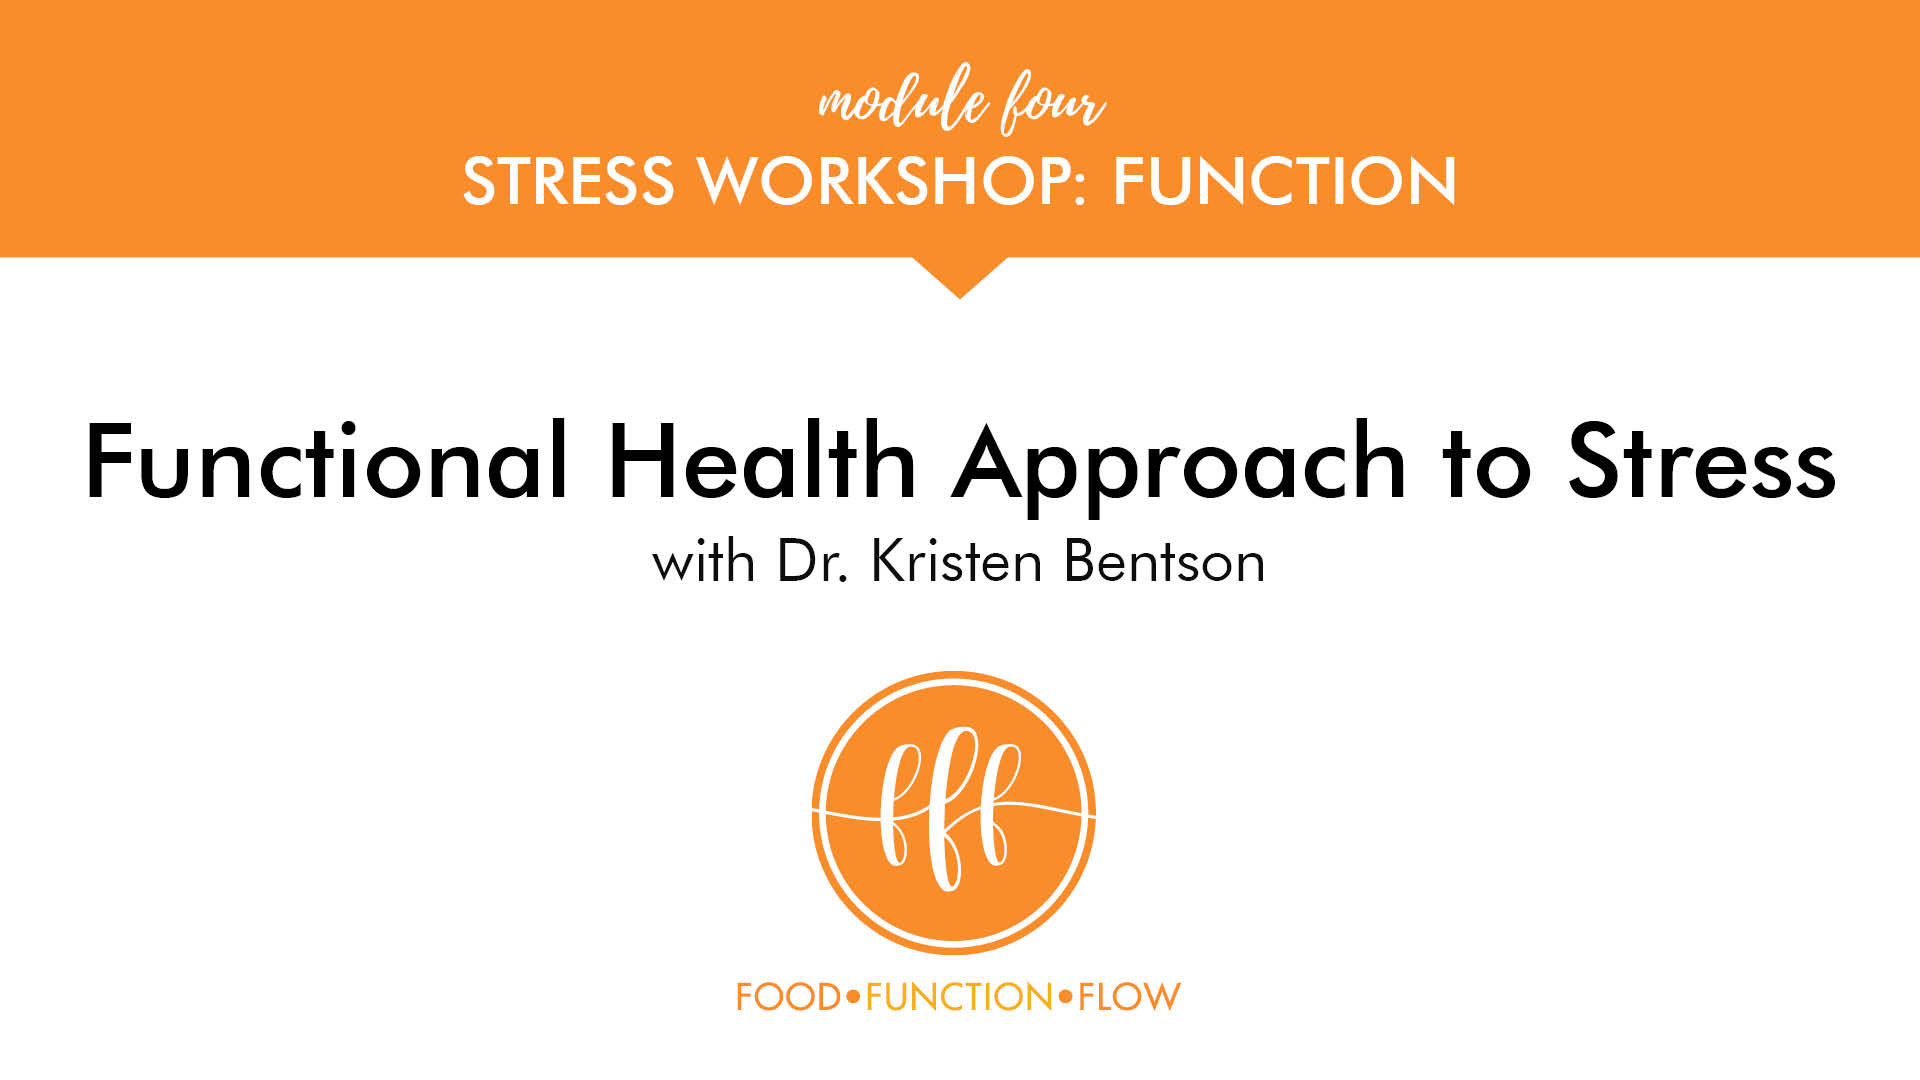 Functional Health Approach to Stress